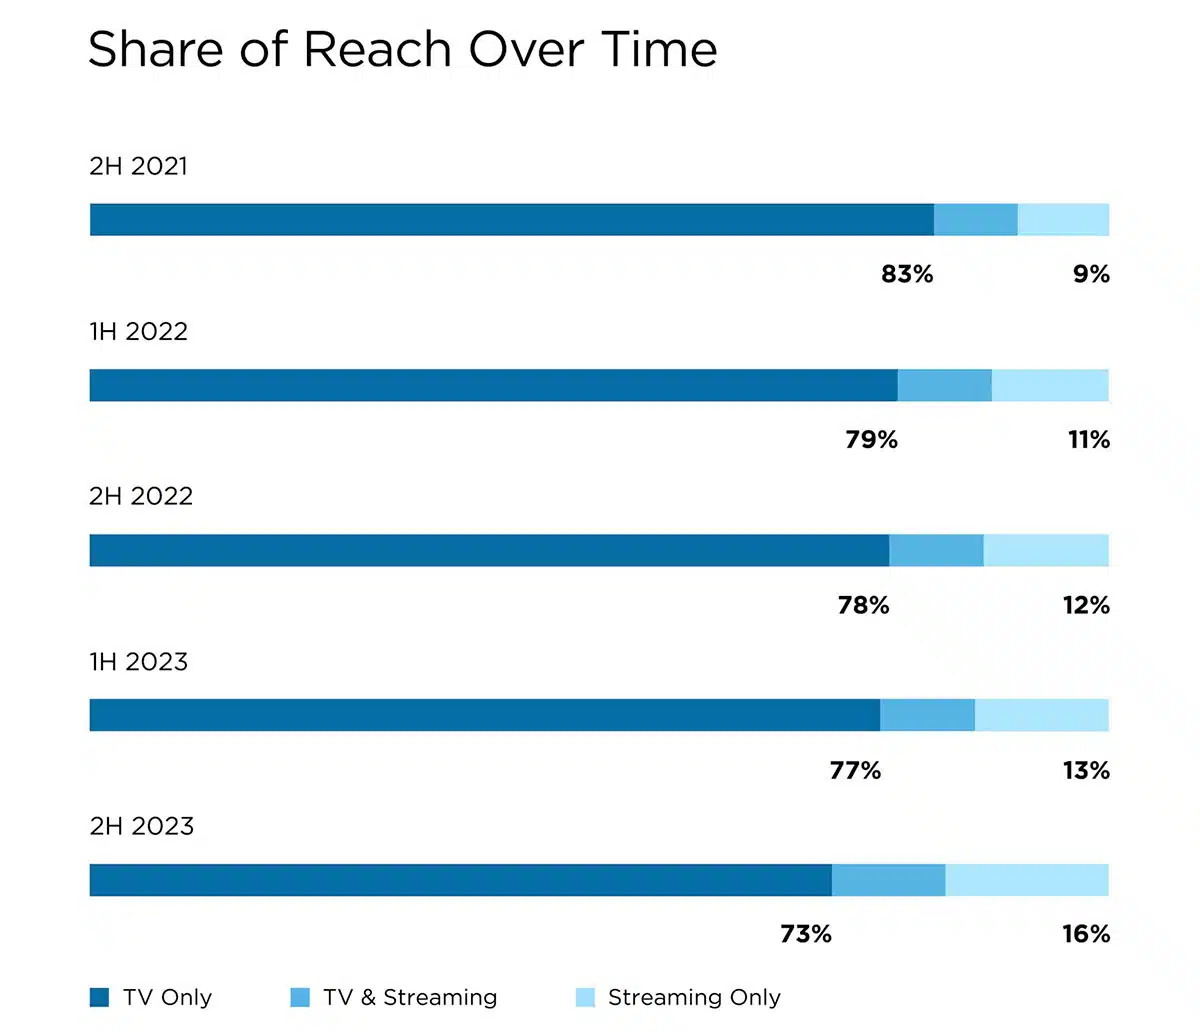 Share of reach over time for TV Only vs TV & Streaming vs Streaming Only.